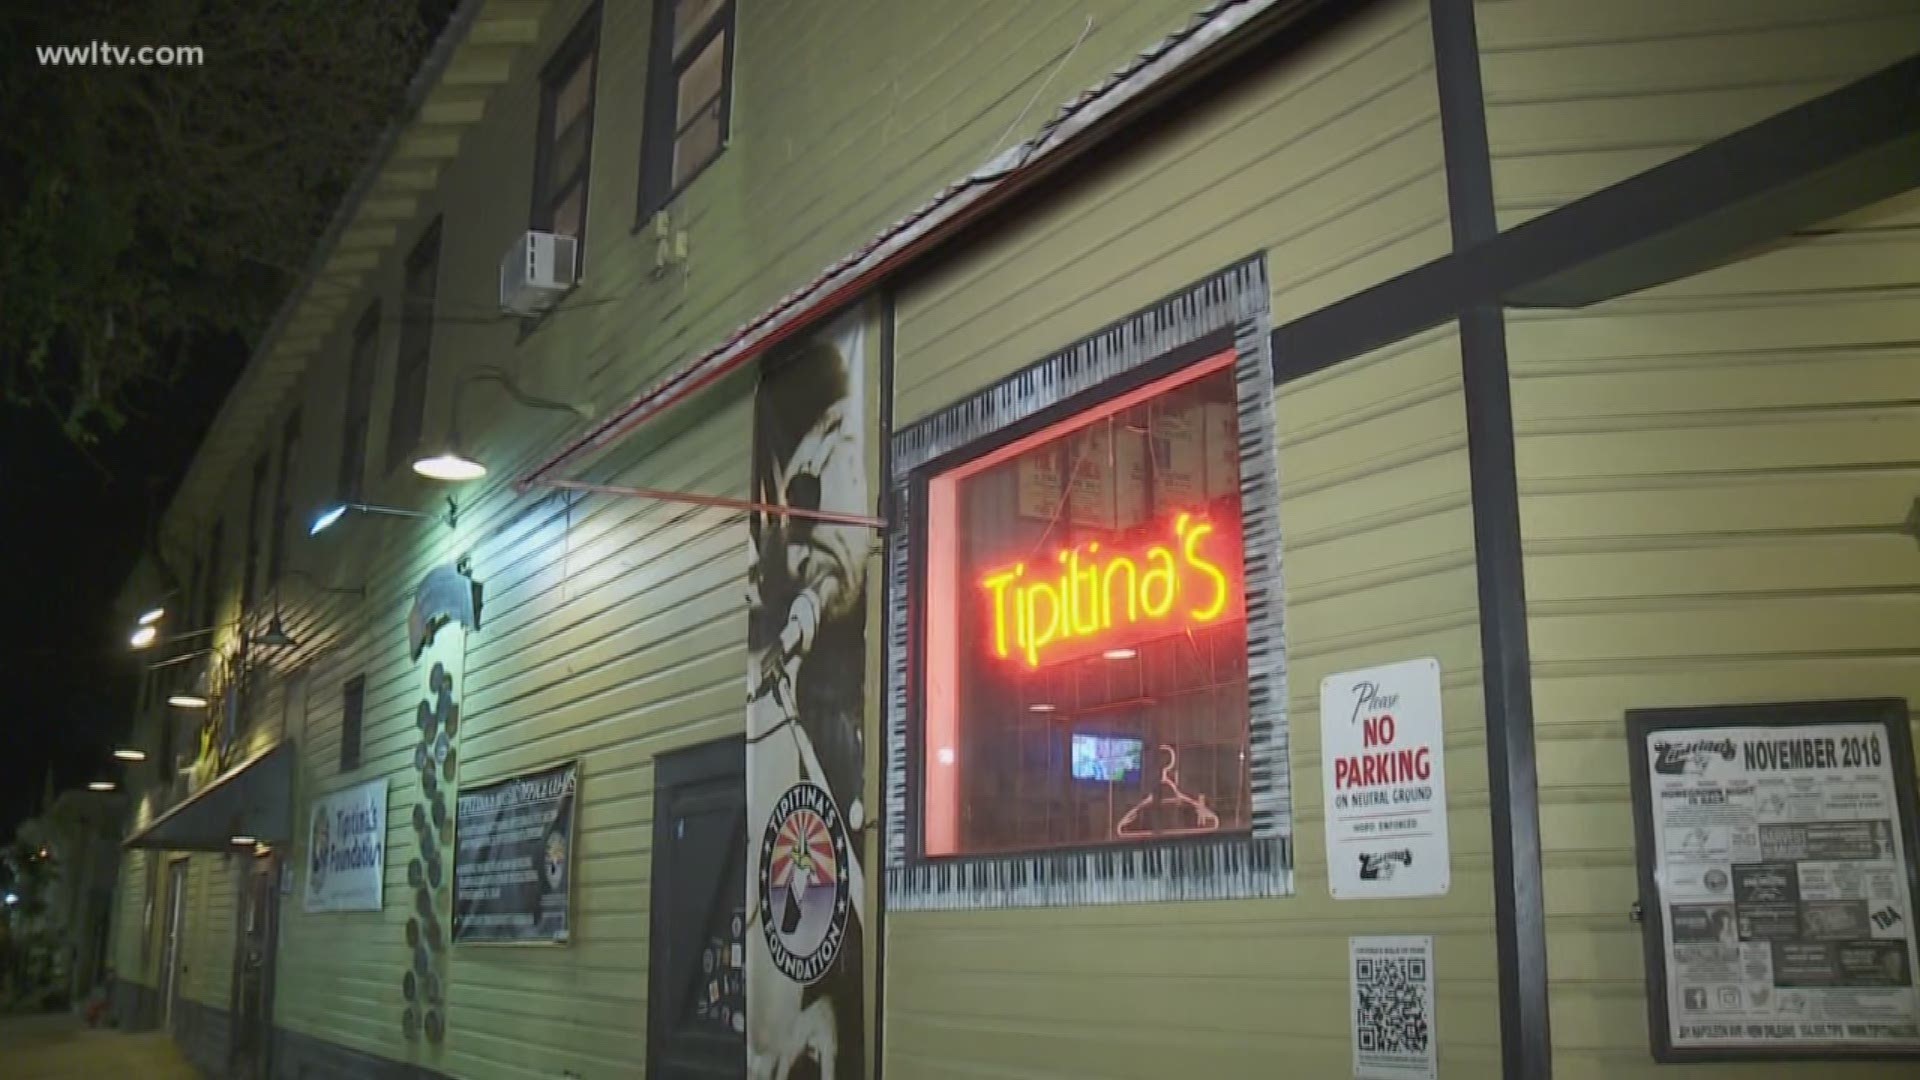 The thought that Tipitina's could be for sale has some music fans and performers keeping an eye on what's going on.